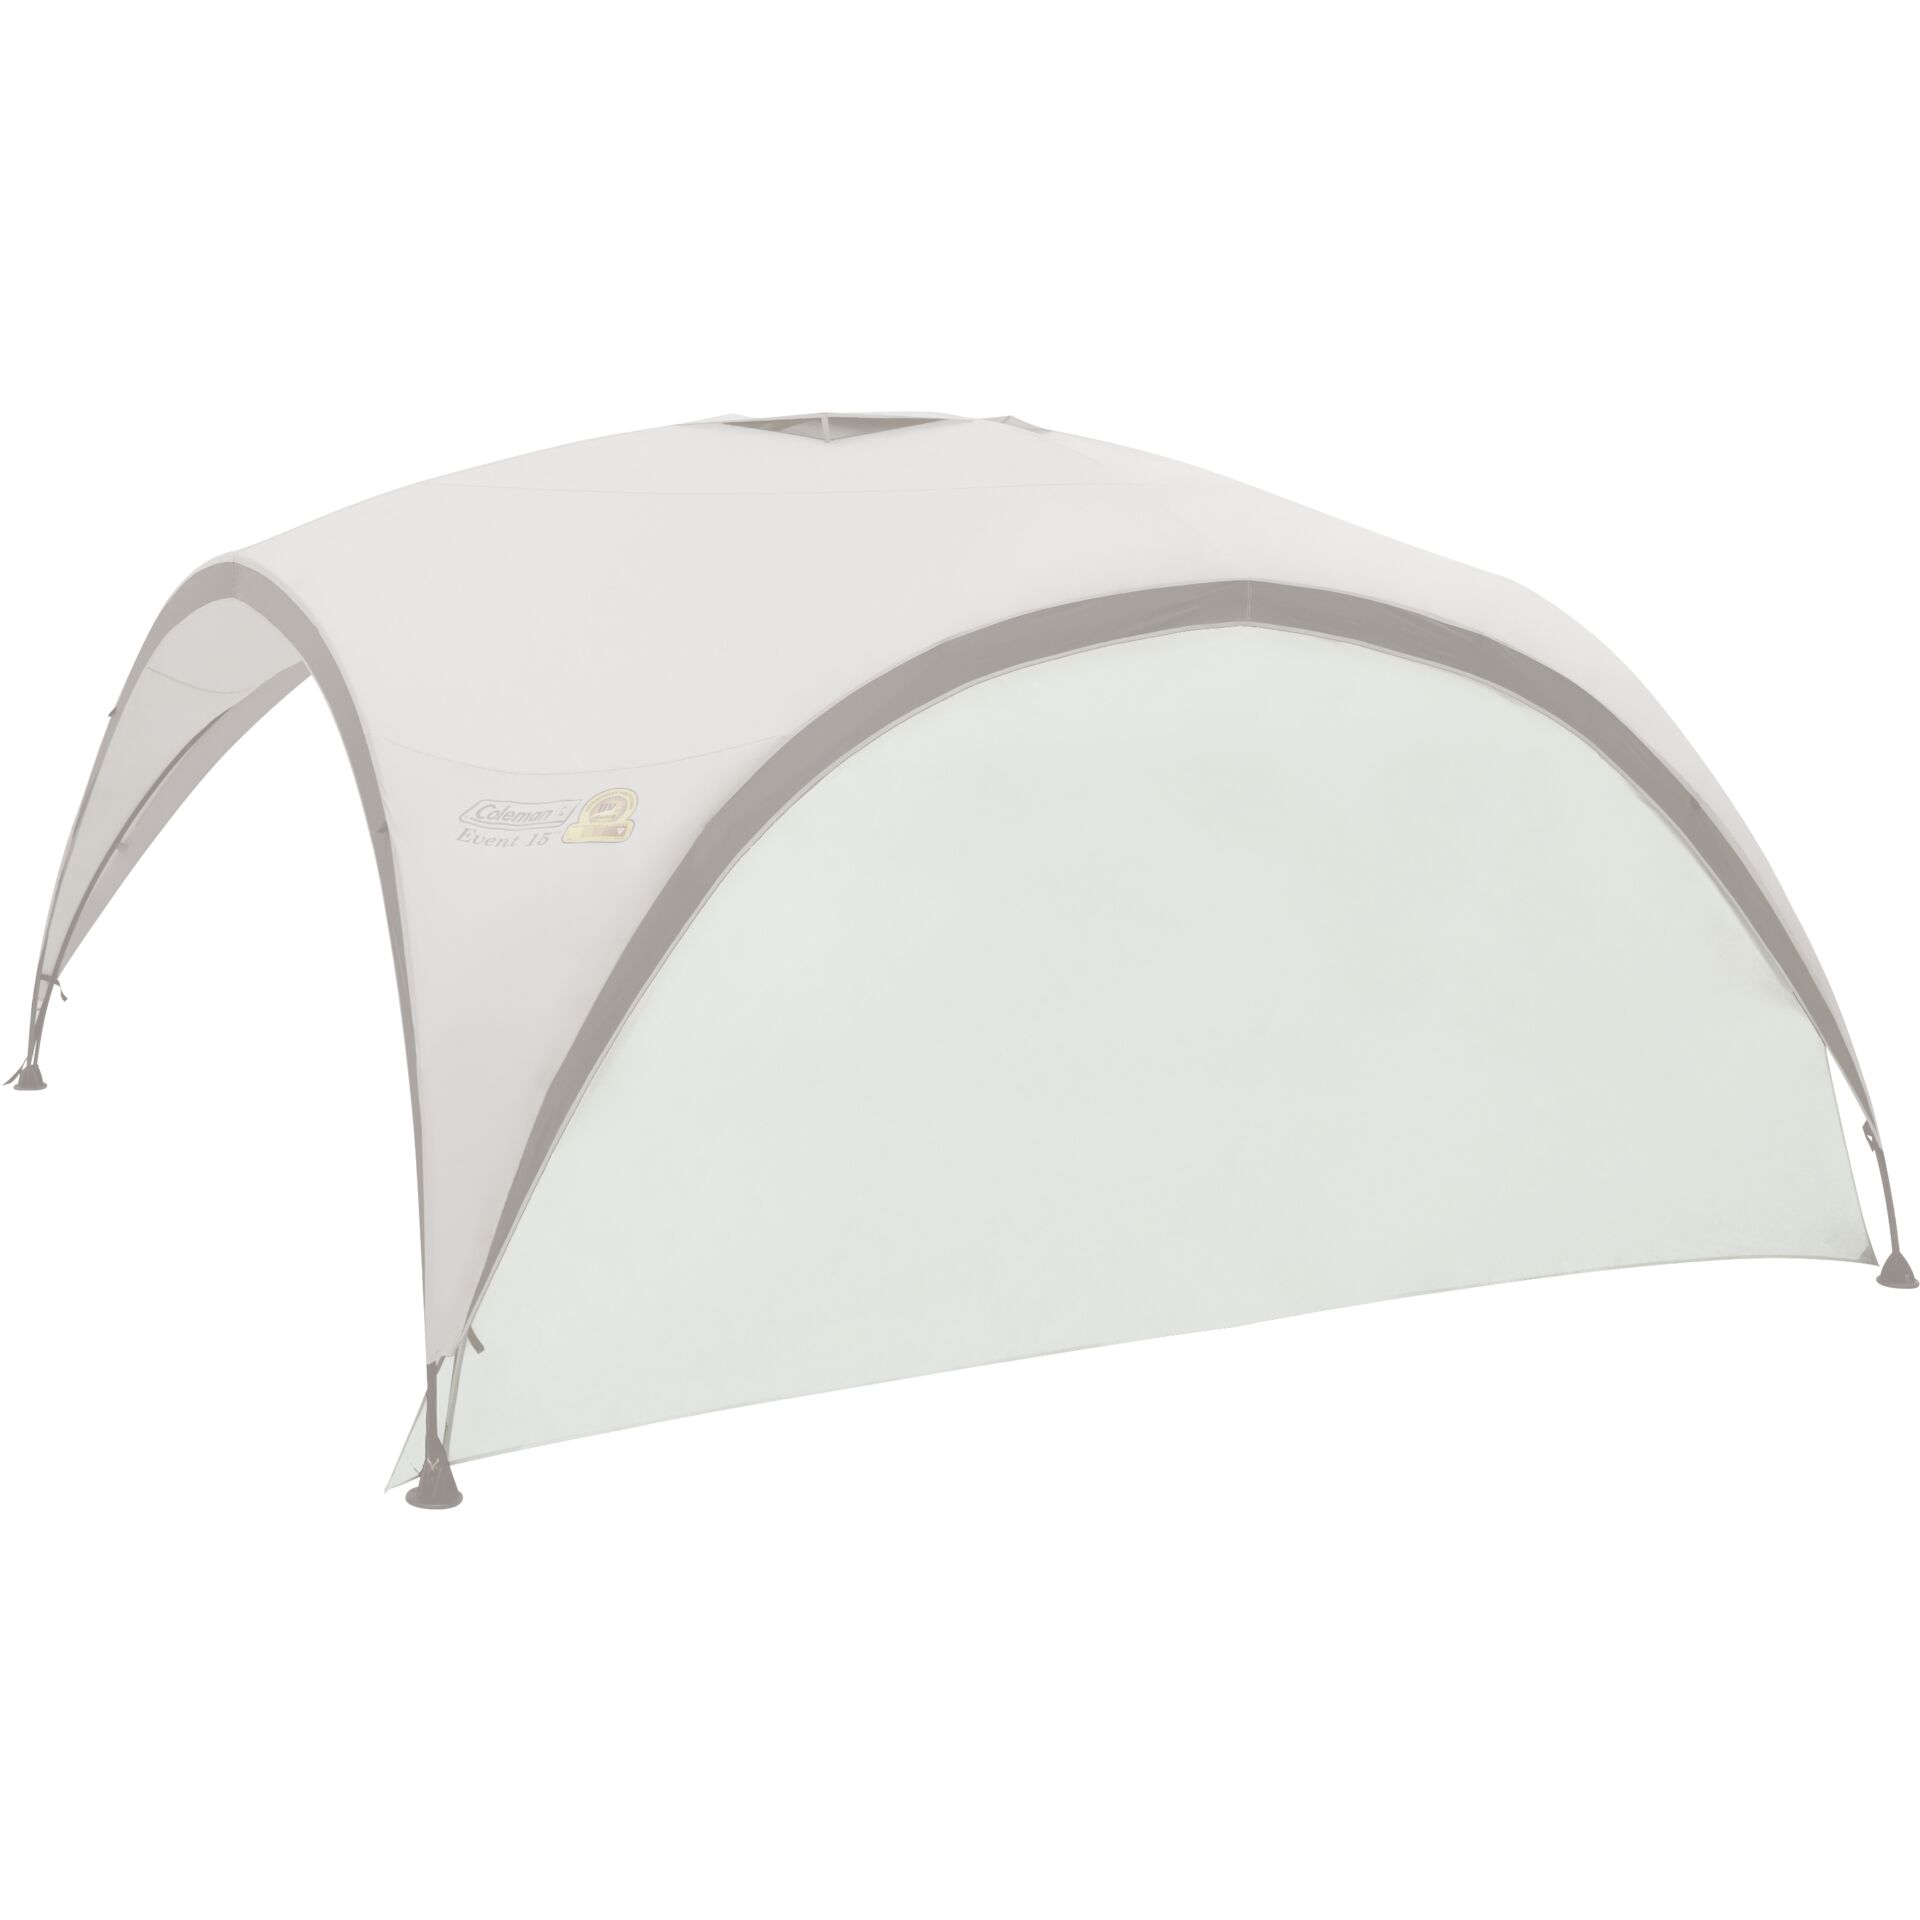 Coleman Event Shelter Pro XL Side Wall